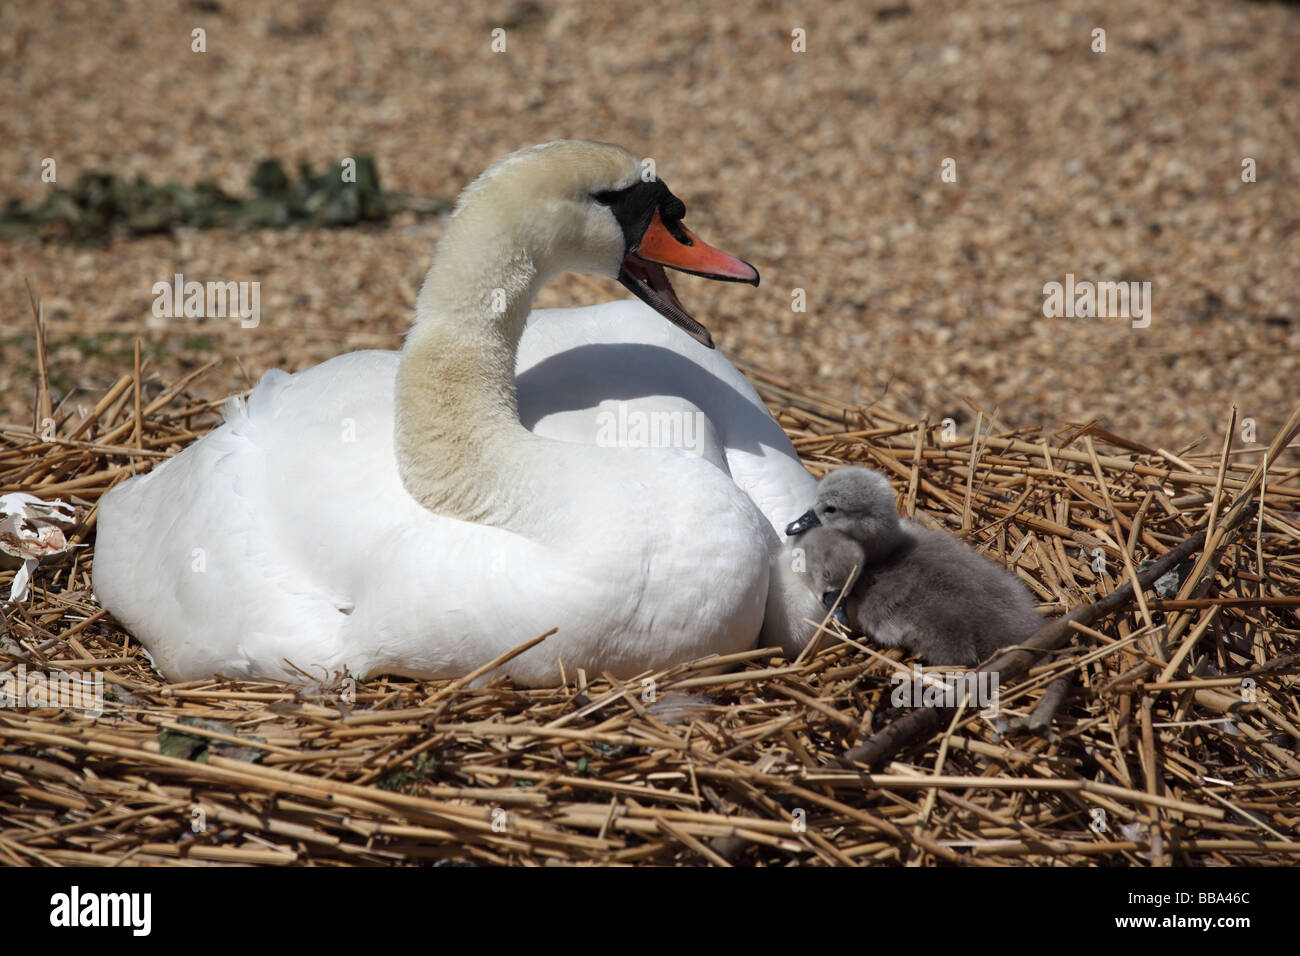 A nesting swan hissing with cygnet at Abbotsbury Swannery, Dorset, England, UK Stock Photo